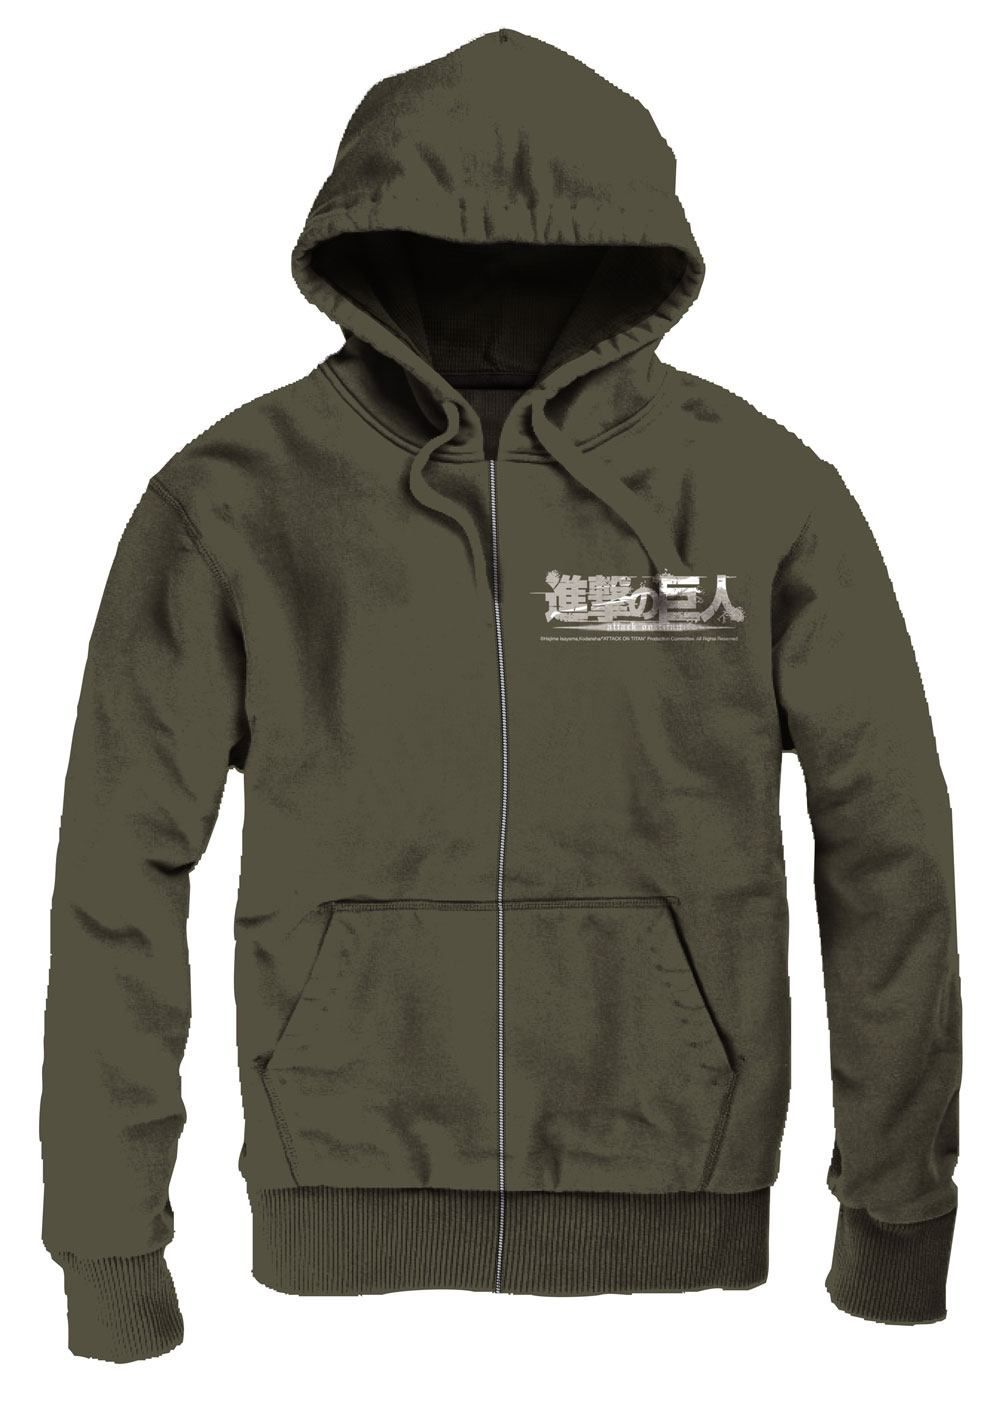 Attack on Titan Hooded Mikina Scout Velikost L Cotton Division